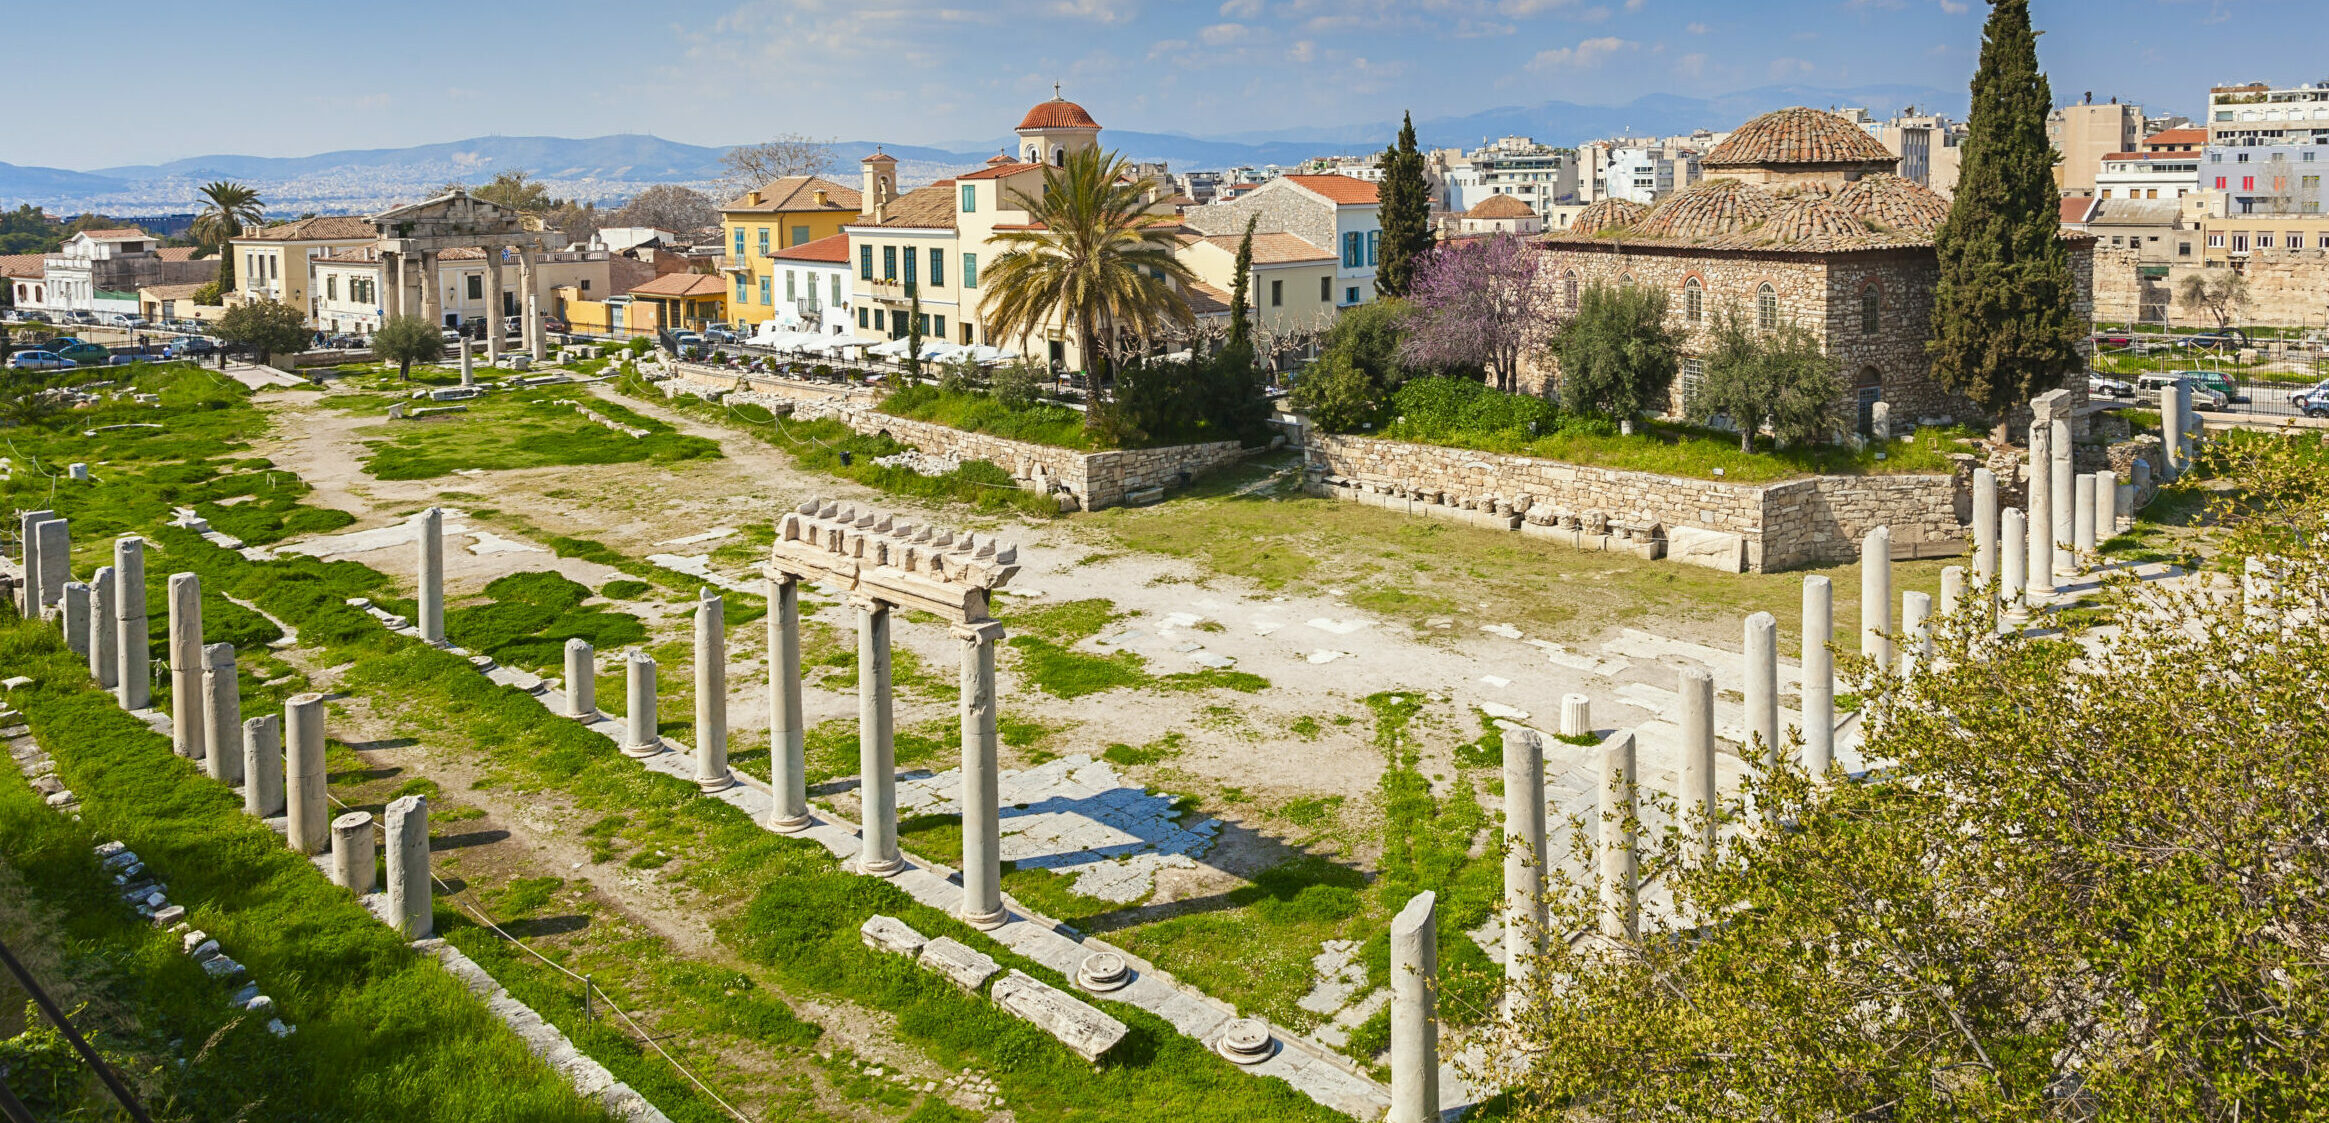 Gone forever:  the old neighborhood under the Acropolis